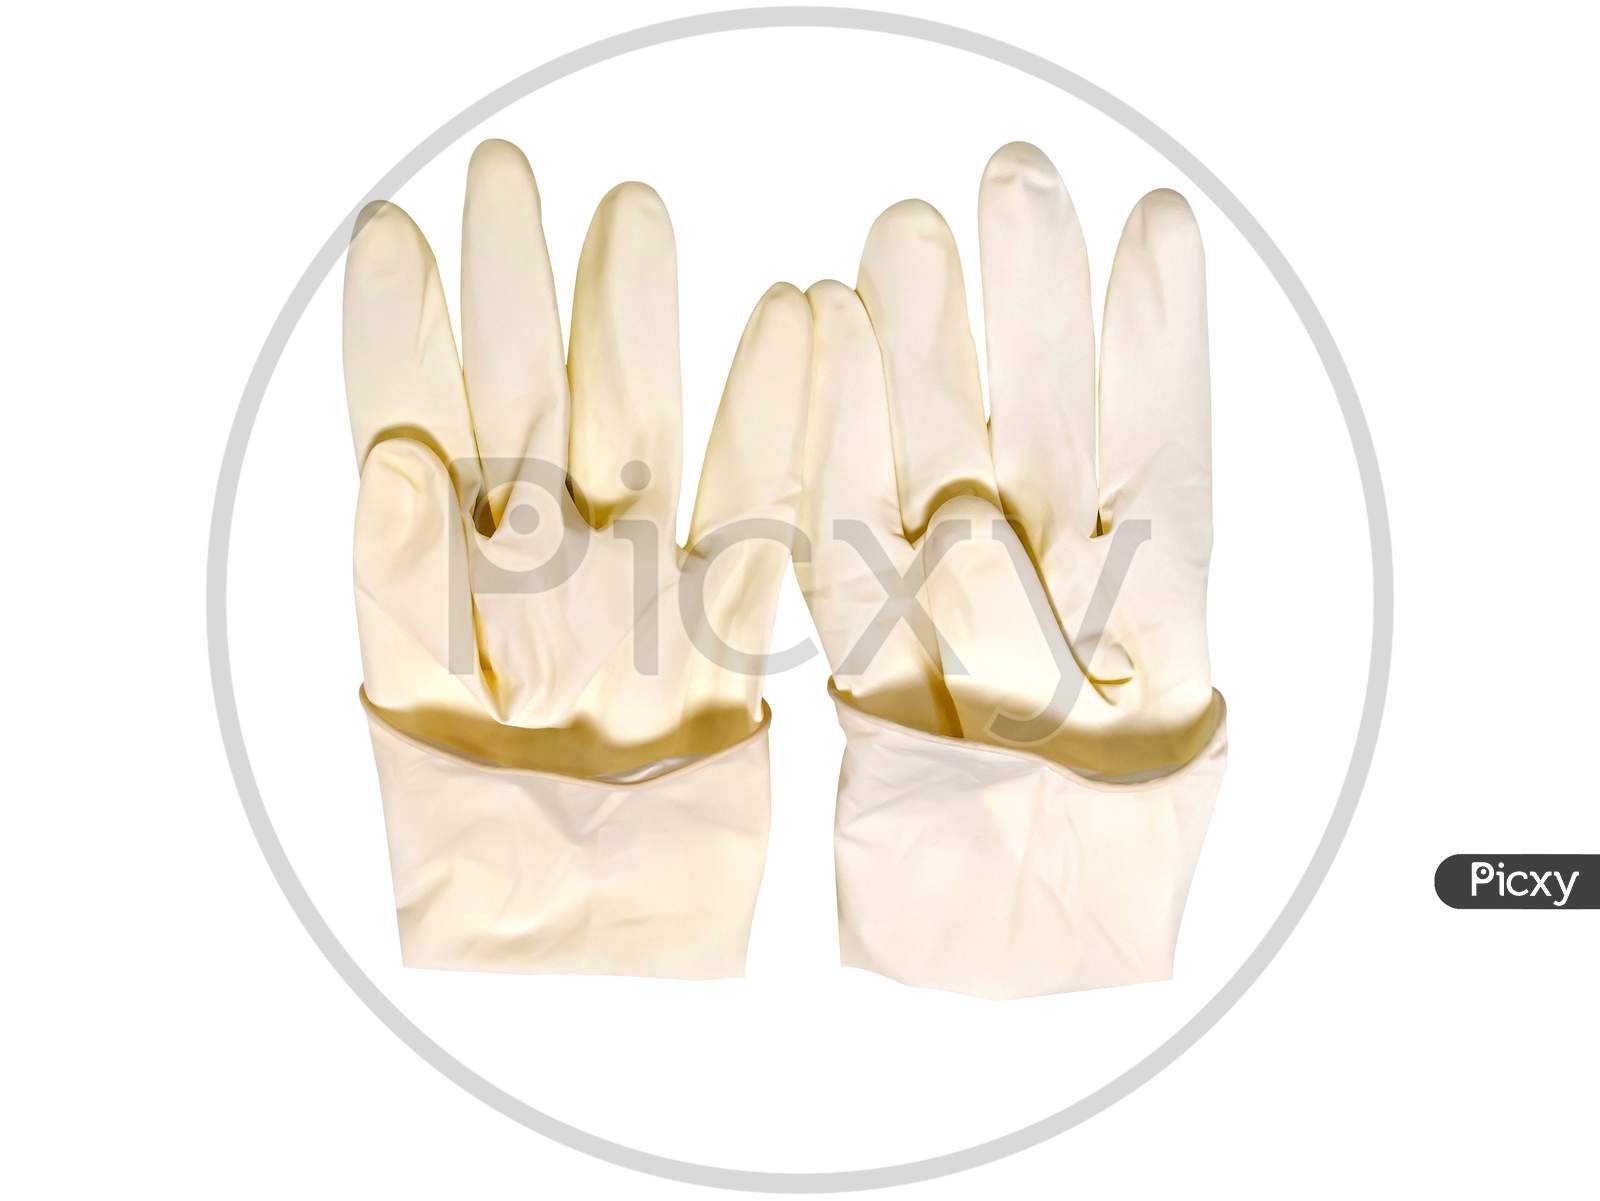 Disposable Surgical Gloves, a Personal Protective Equipment